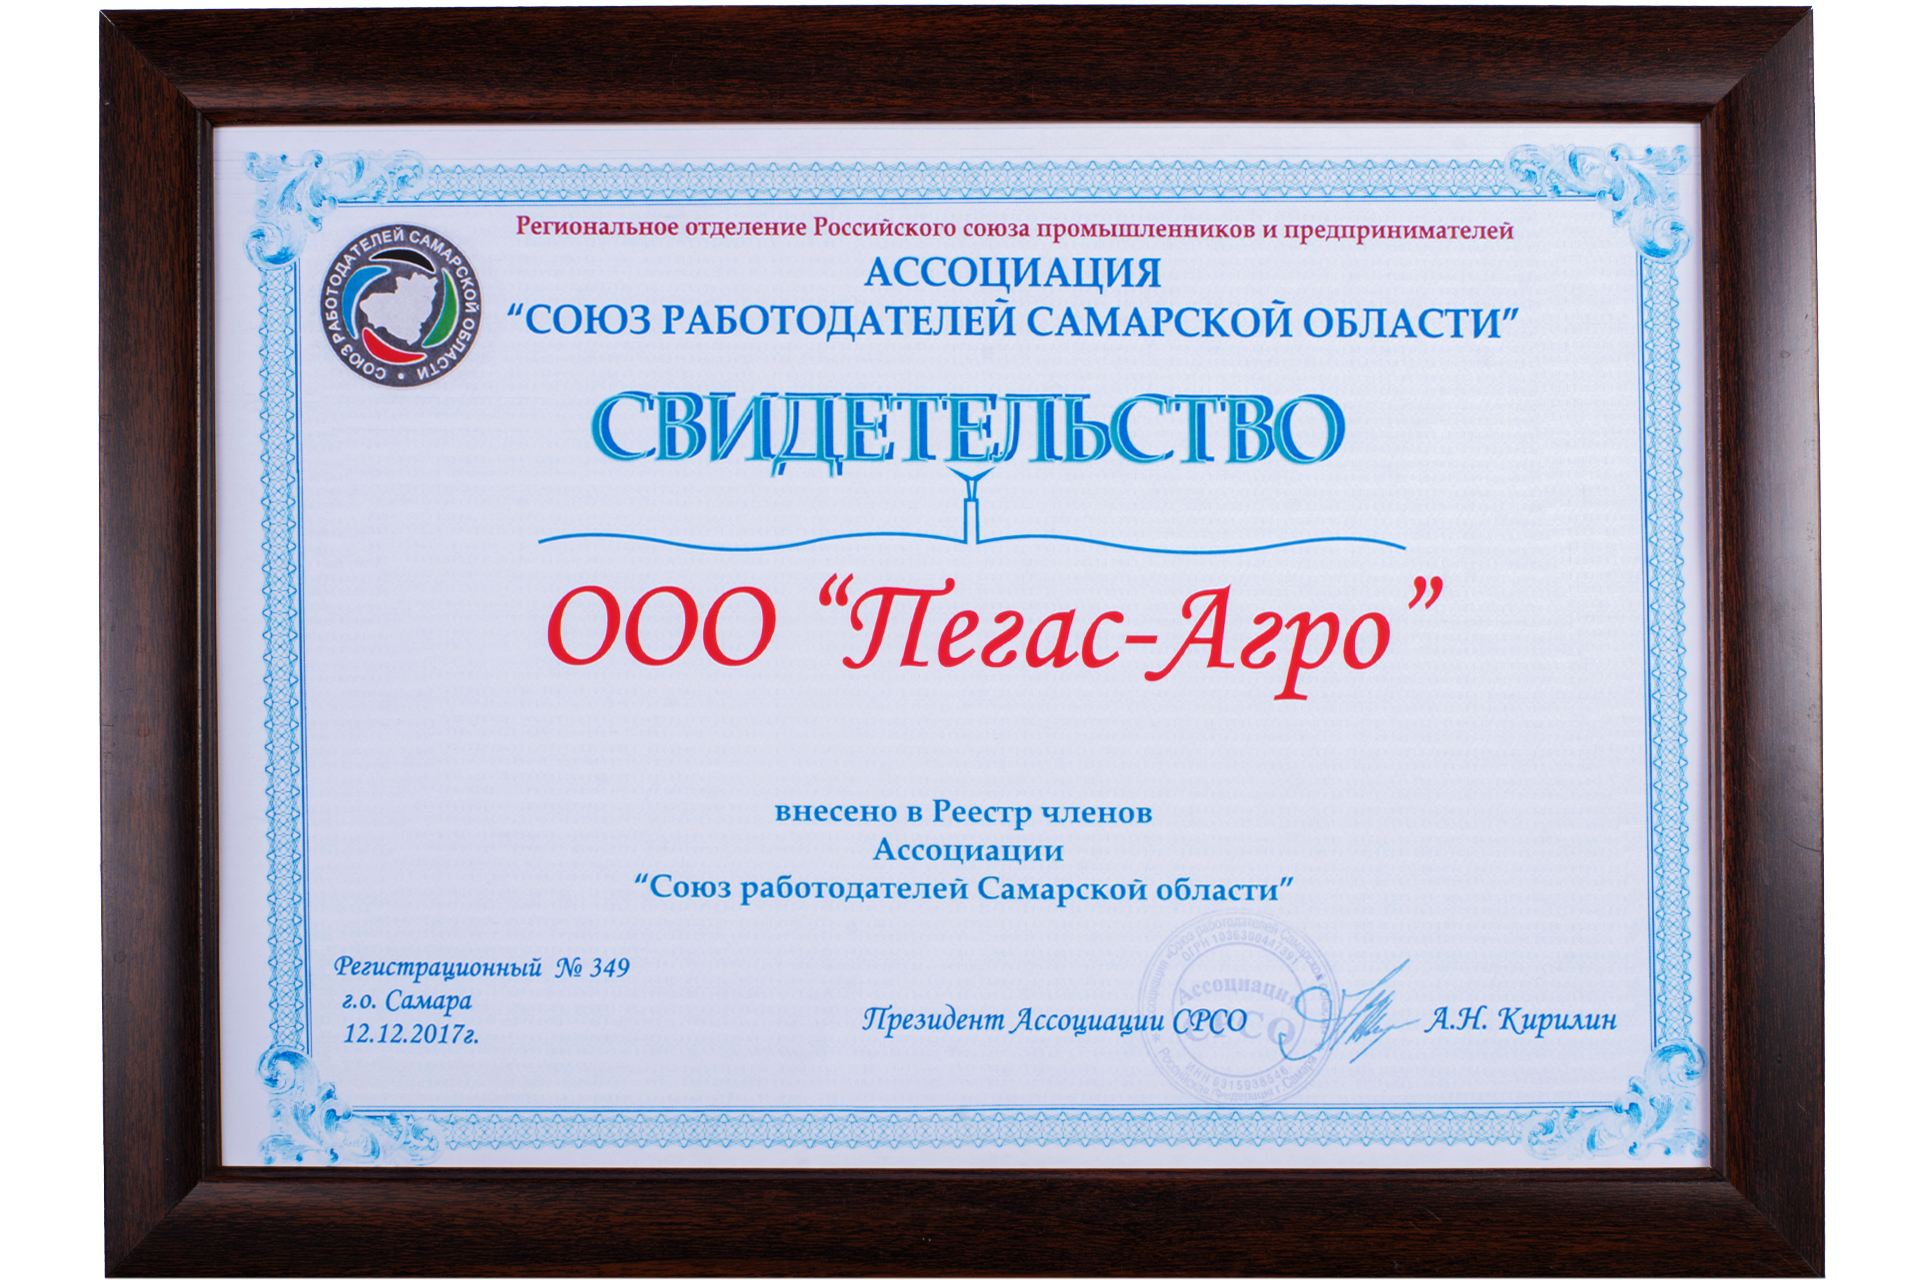 Certificate of entry into the Register of Members of the Association “Union of Employers of the Samara Region”, Samara 